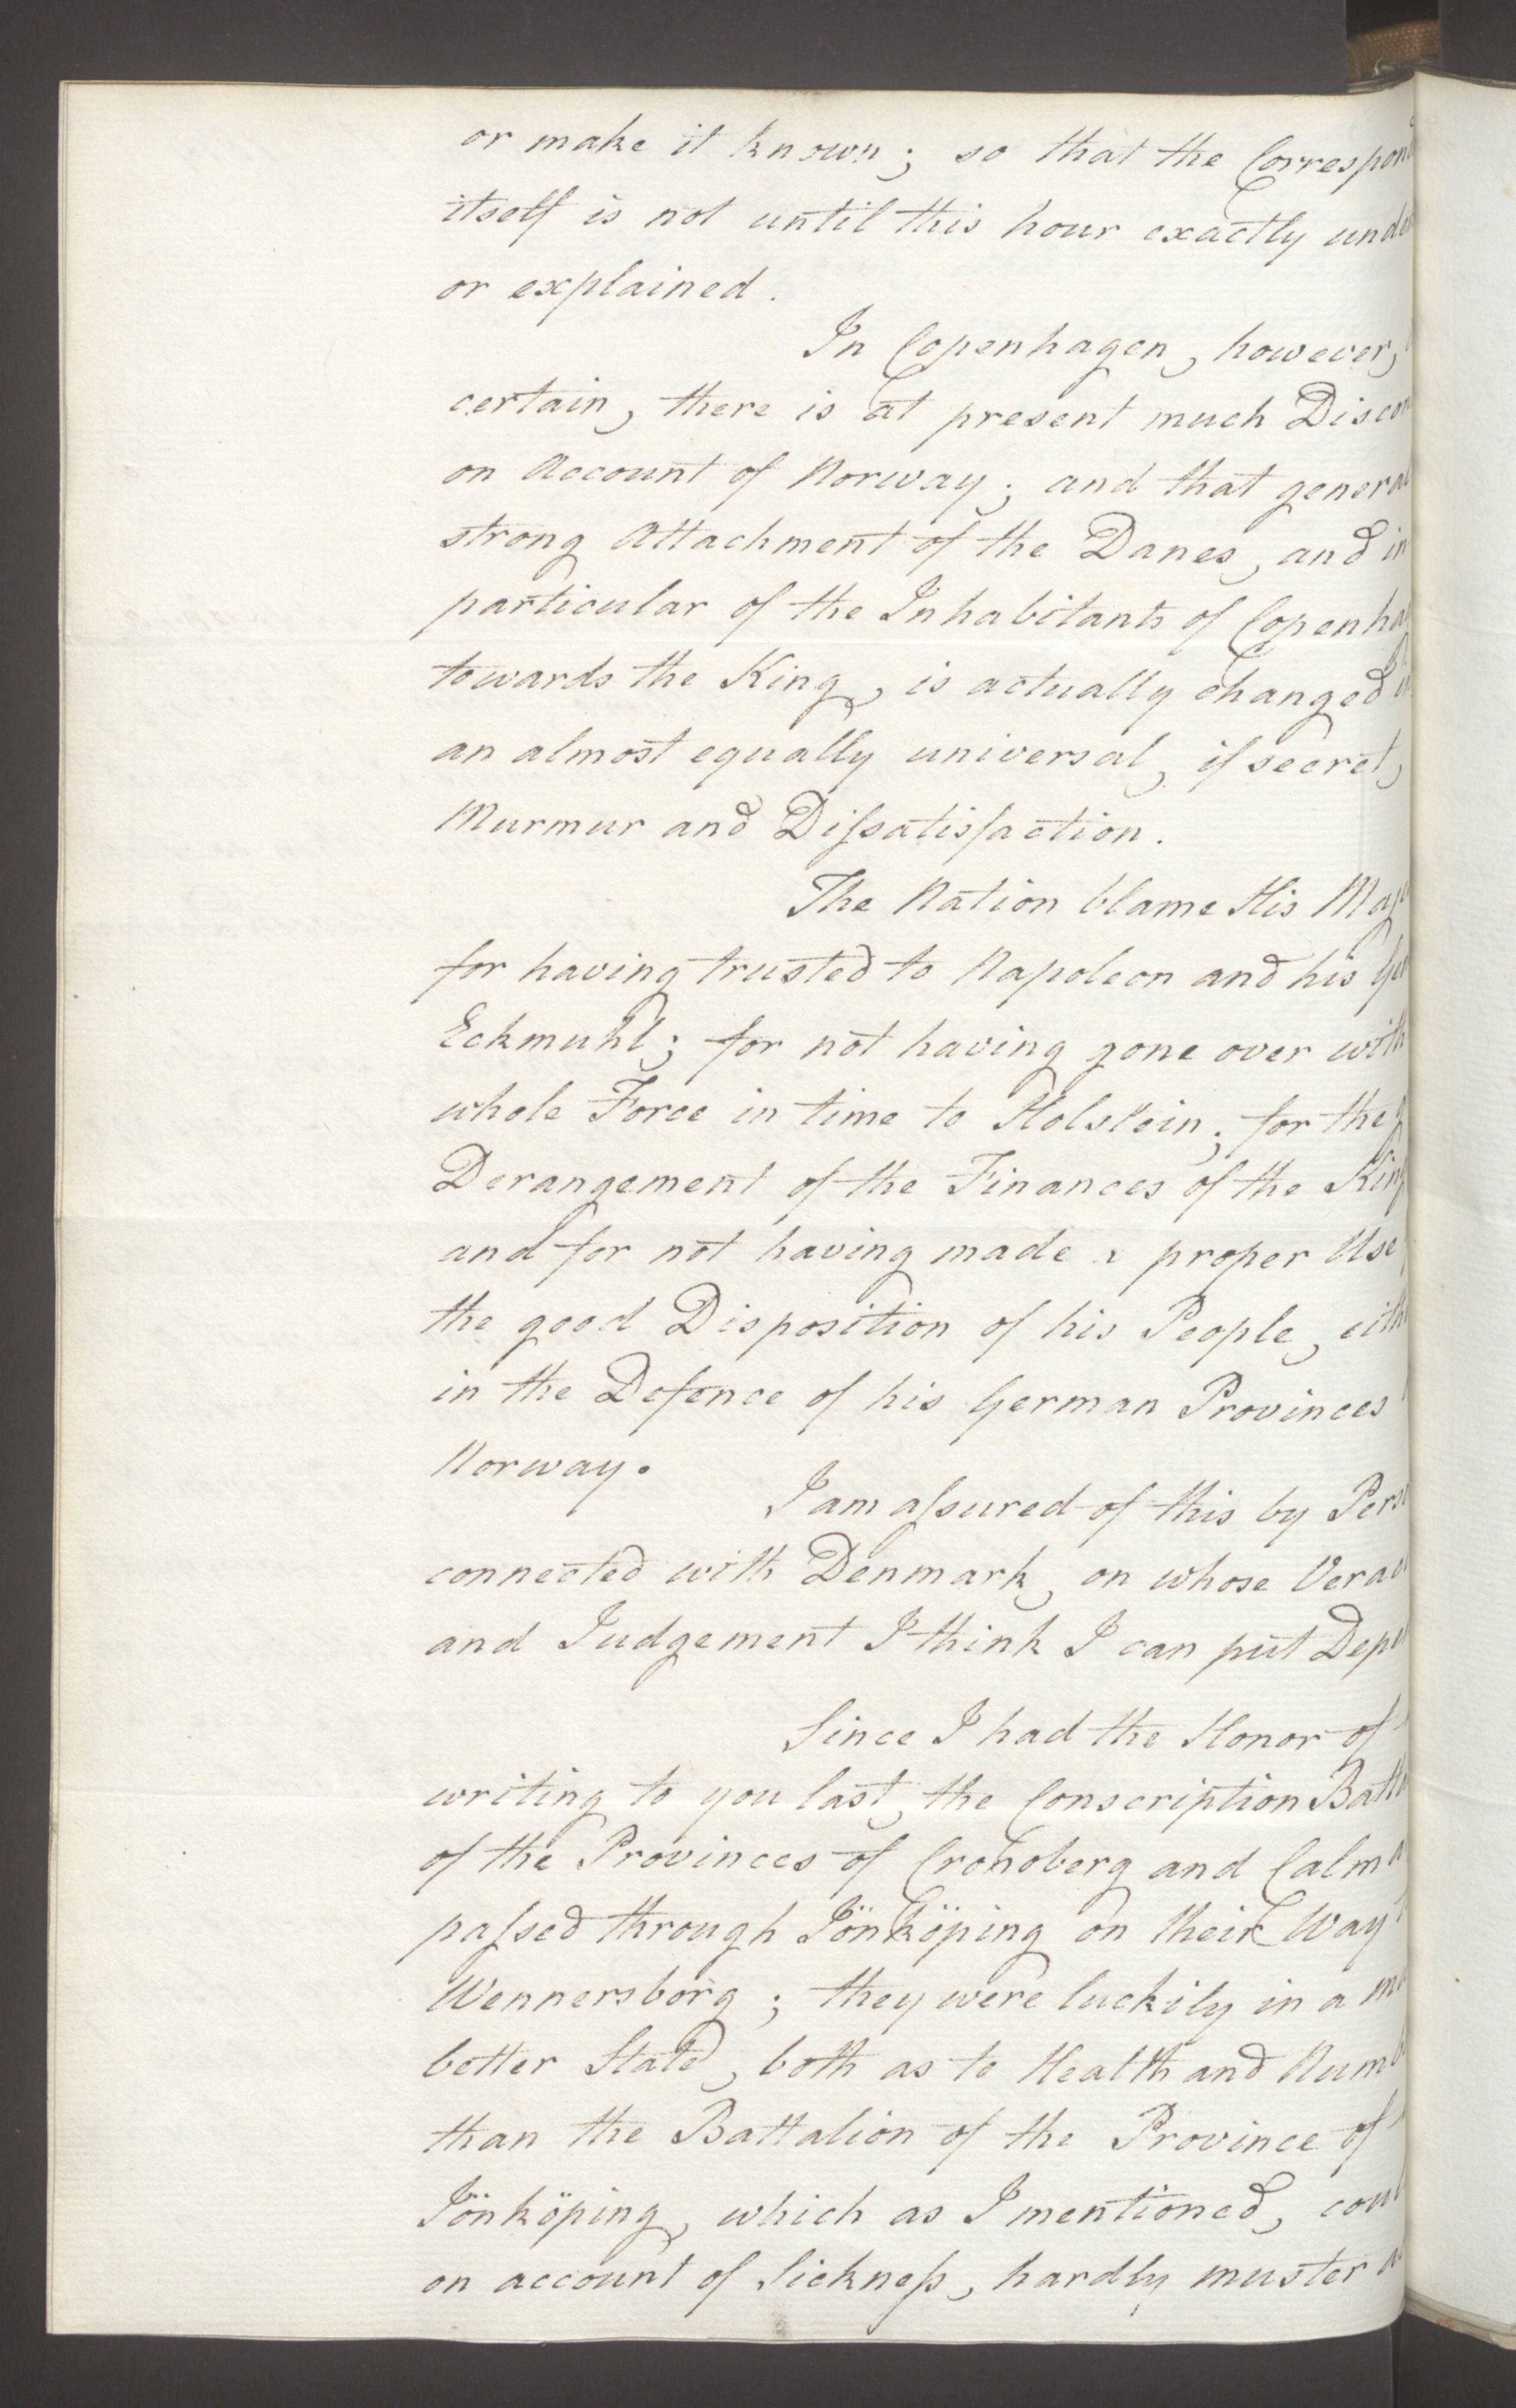 Foreign Office*, UKA/-/FO 38/16: Sir C. Gordon. Reports from Malmö, Jonkoping, and Helsingborg, 1814, p. 58